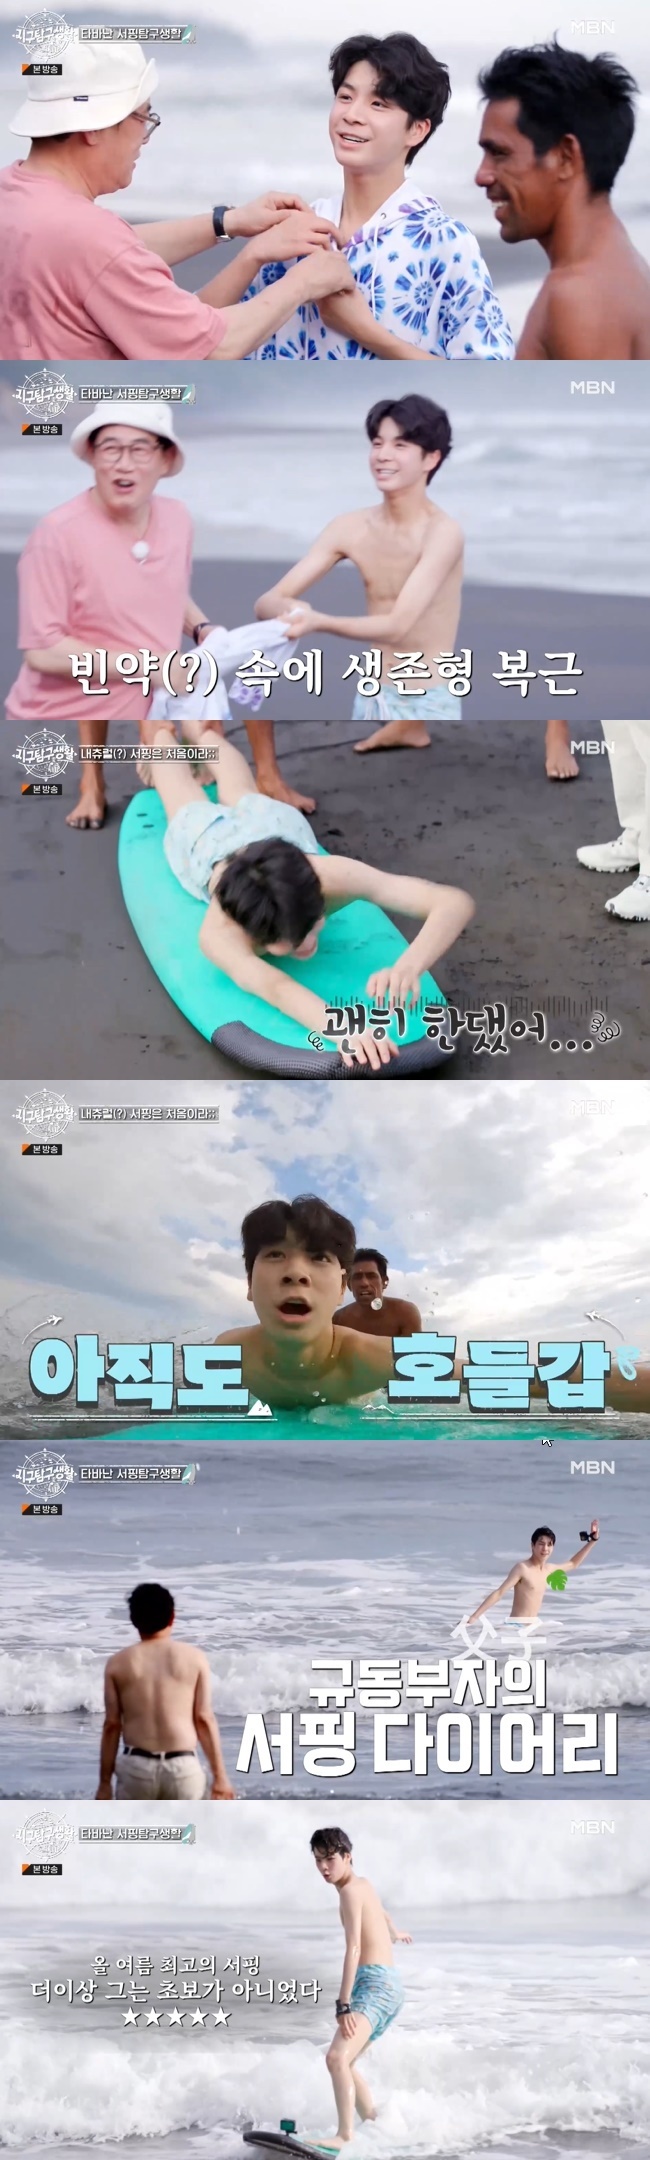 Jung Dong-won reveals his Earth type 2 absIn MBN  ⁇ earth exploration life ⁇  broadcasted on June 6, Jung Dong-won, the top model in the first surfing, was drawn.Jung Dong-won told Lee Kyung-kyu that he wanted to surf, and they got on an old truck and arrived at Balian Beach.The two men first went to the swimsuit store and picked a swimsuit without worrying in five seconds. When Jung Dong-won, wearing a swimsuit and a shirt, was attracted to his appearance, Lee Kyung-kyu said, Lets go.I dragged him out like a baby.Jung Dong-won, who started a full-scale class with a coach on the beach, was embarrassed to see his armpit at the end of the instructor telling him to take off his T-shirt.Lee Kyung-kyu took off Jung Dong-wons T-shirt, saying that he had a good time, and was surprised to see his abs.Jung Dong-won put his body right on the board in embarrassment and took a lesson on the beach. Jung Dong-won regretted that he should have done it.Out to sea, Jung Dong-won fussed over the cold waters and waves.Jung Dong-won, who had been falling into the water for the first time surfing, stood on the board at the end of the repeated Top Model and succeeded in surfing properly.